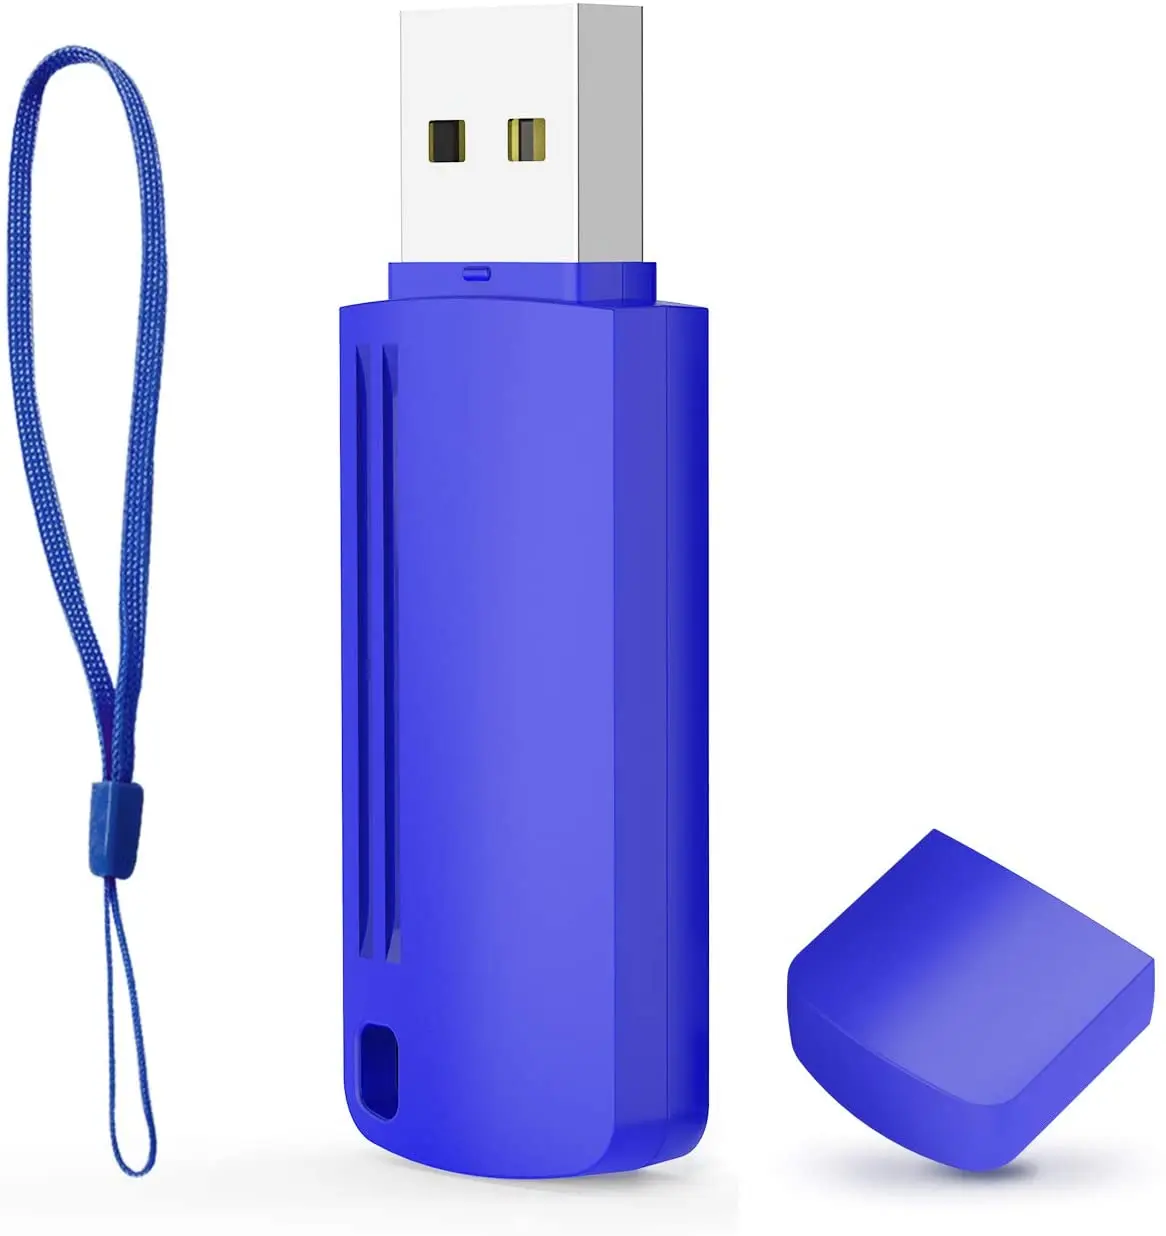 

TOPESEL Flash Drive USB 3.0 Flash Drive Thumb Drive 16/32/64/128GB Memory Stick Jump Drive with Lanyard -Speed up to 100MB/s